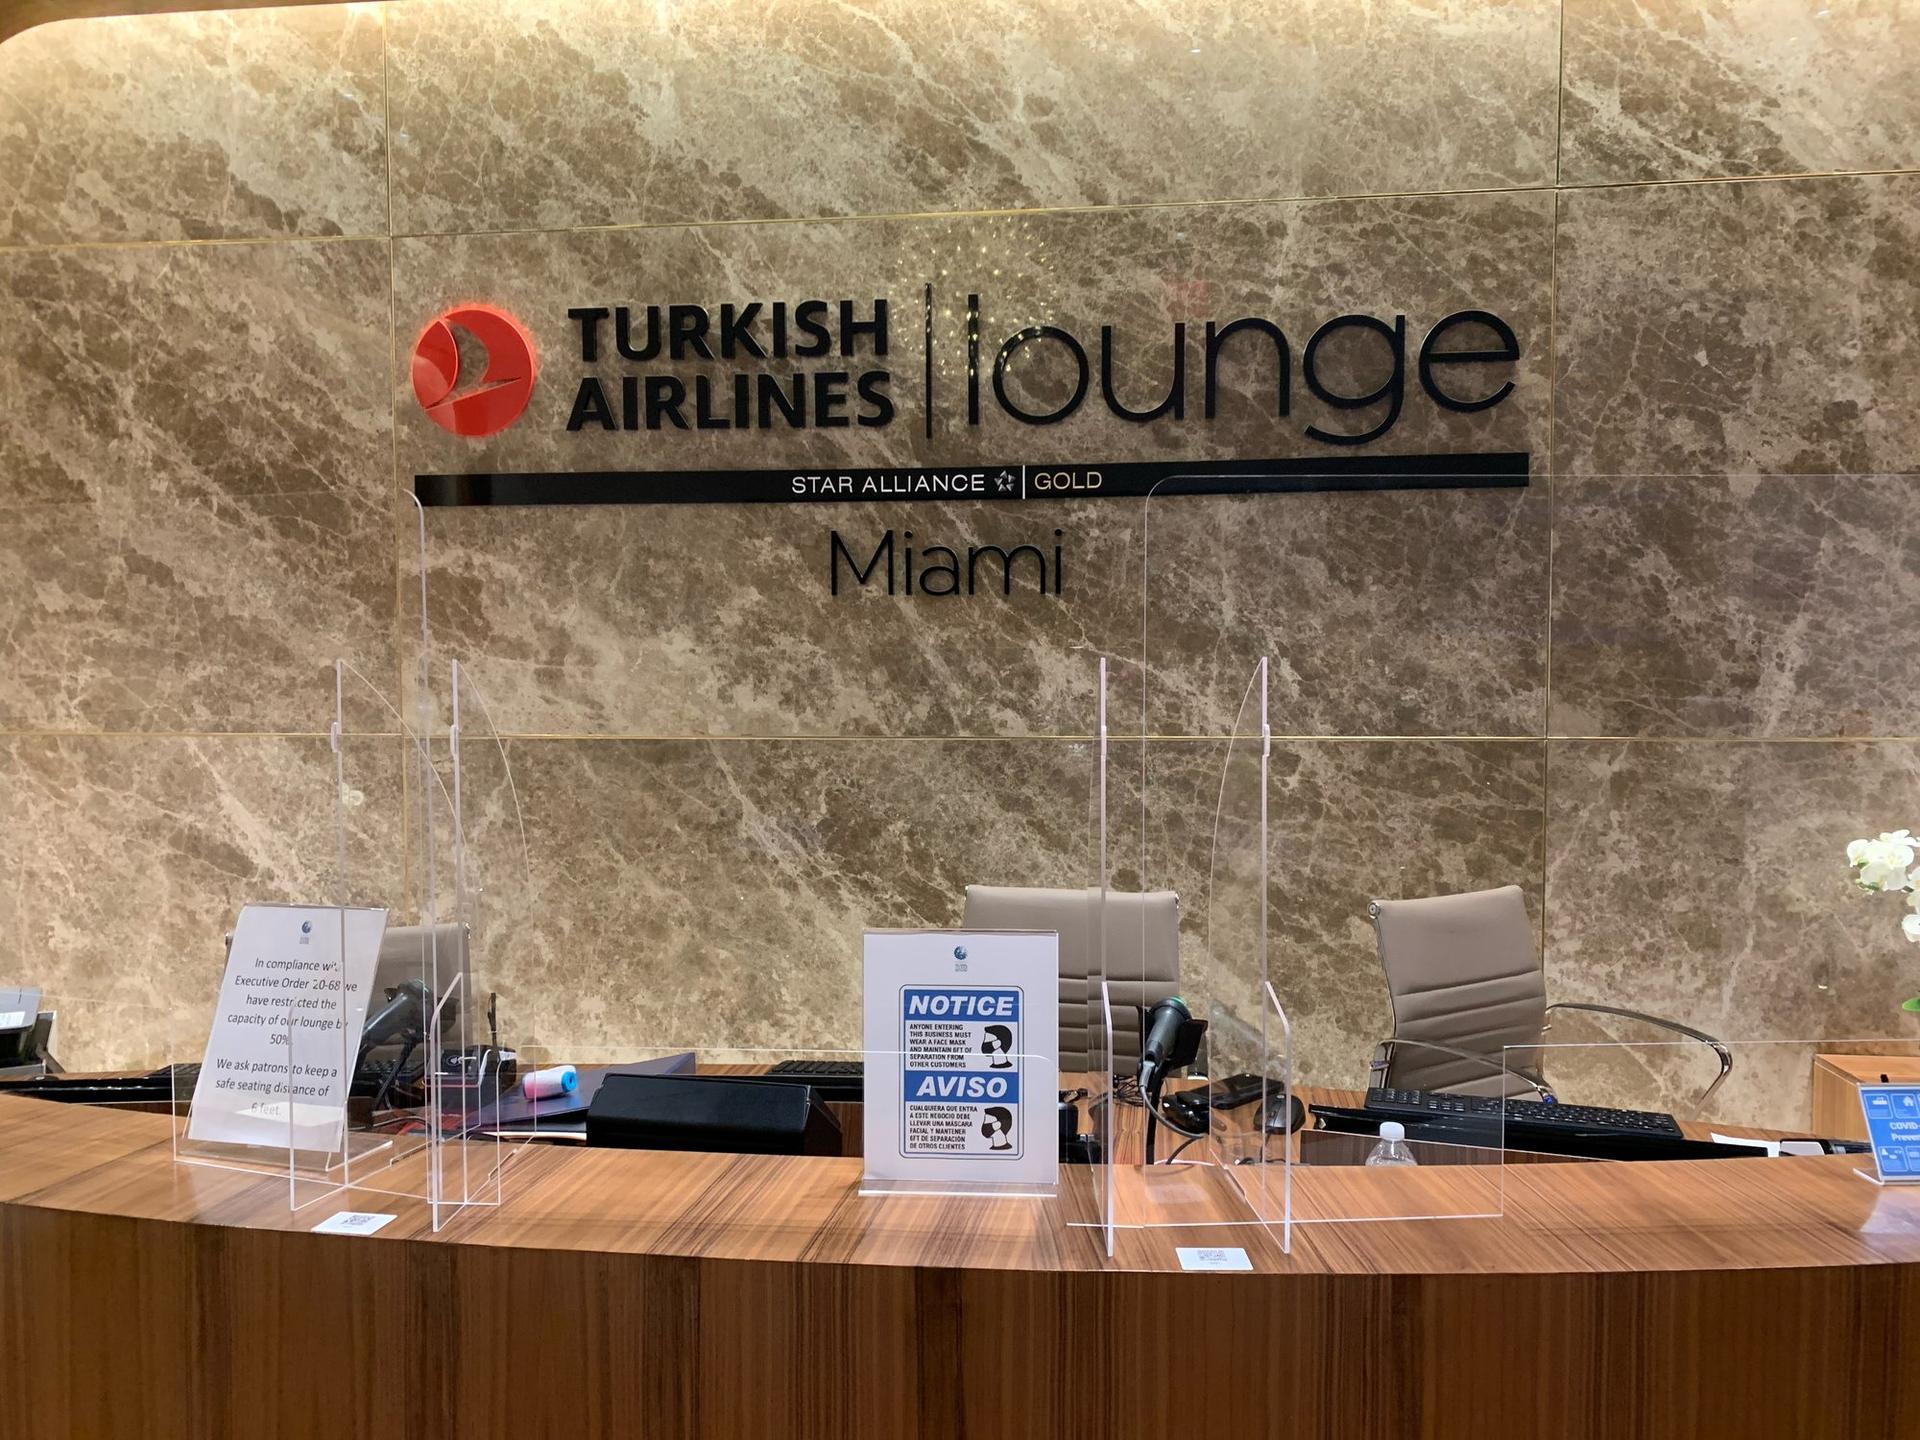 Turkish Airlines Lounge image 7 of 8